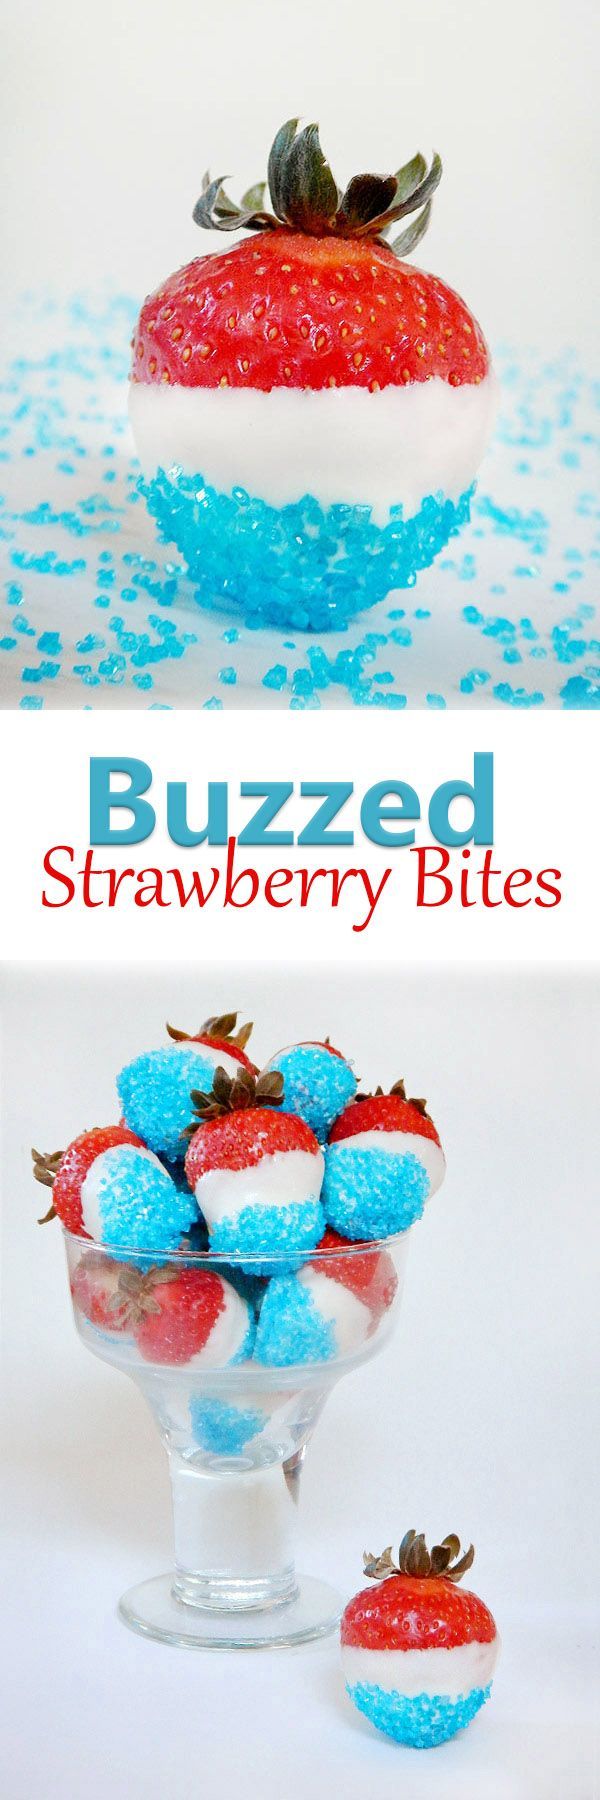 Buzzed Strawberry Bites Strawberries soaked in rum then covered in white chocolate and blue sprinkles. Per